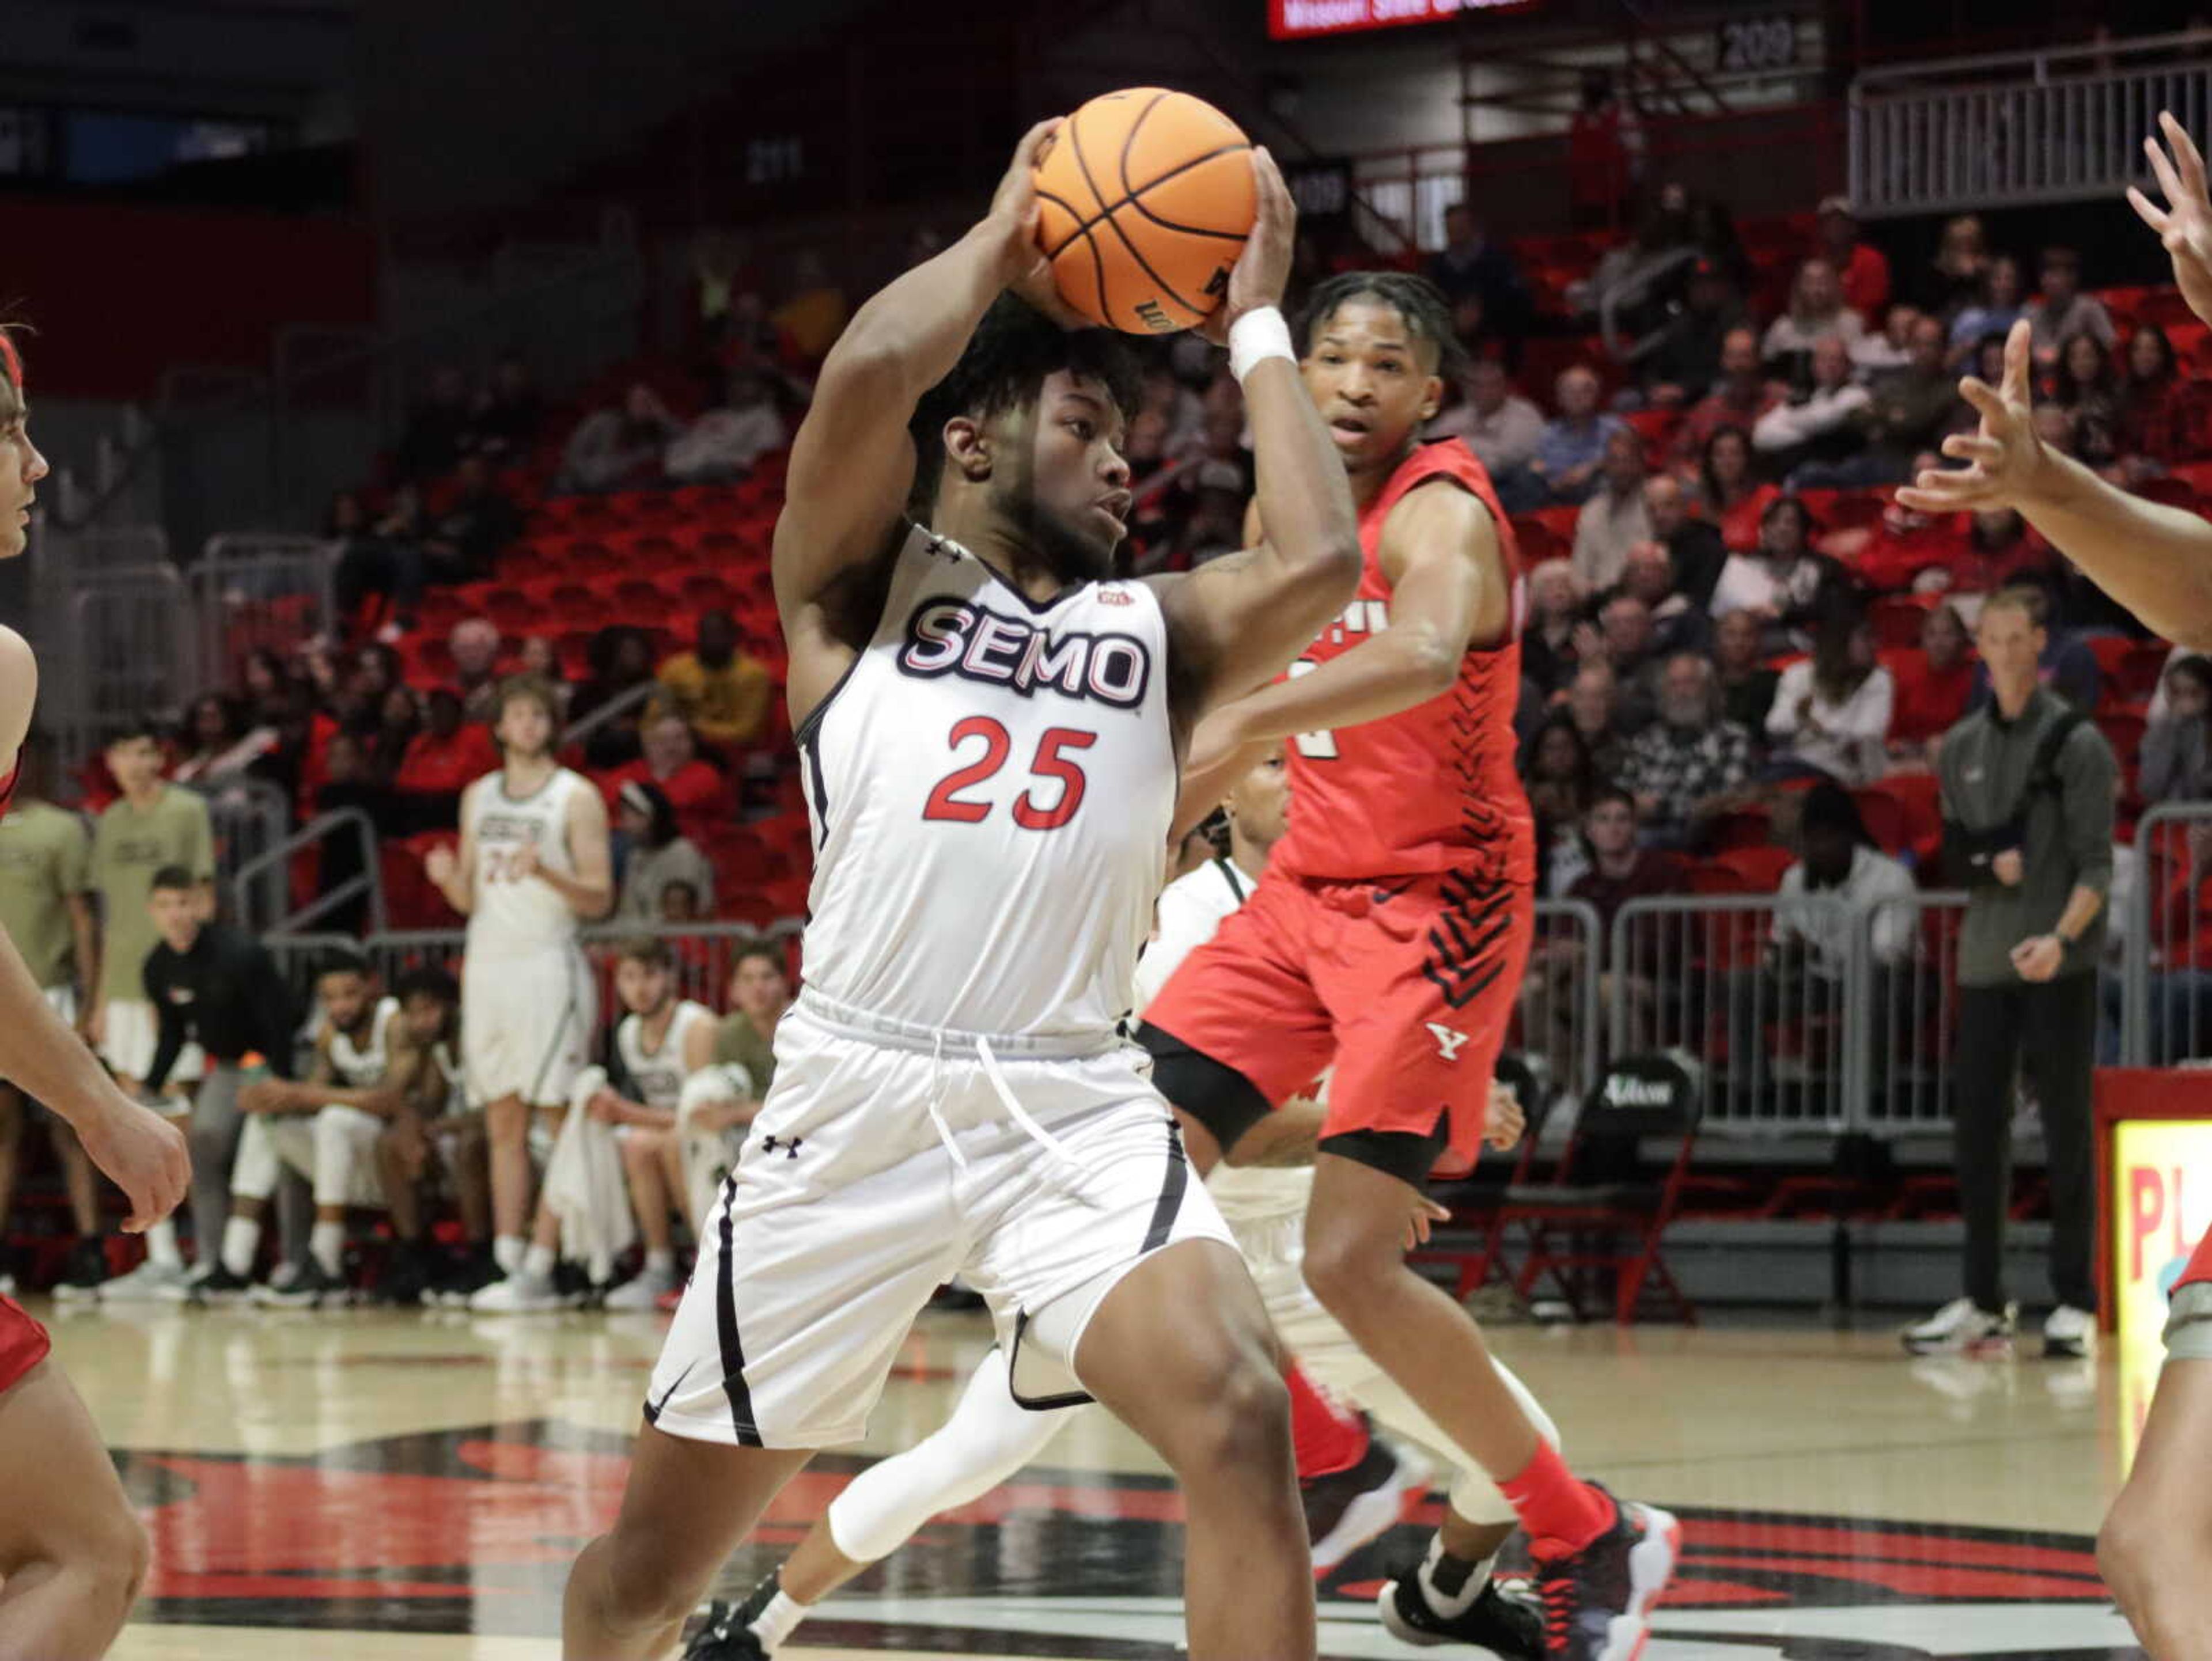 Senior guard Nygal Russell drives down the lane during SEMO's 97-79 loss against Youngstown State on Nov. 13 at the Show Me Center in Cape Girardeau.